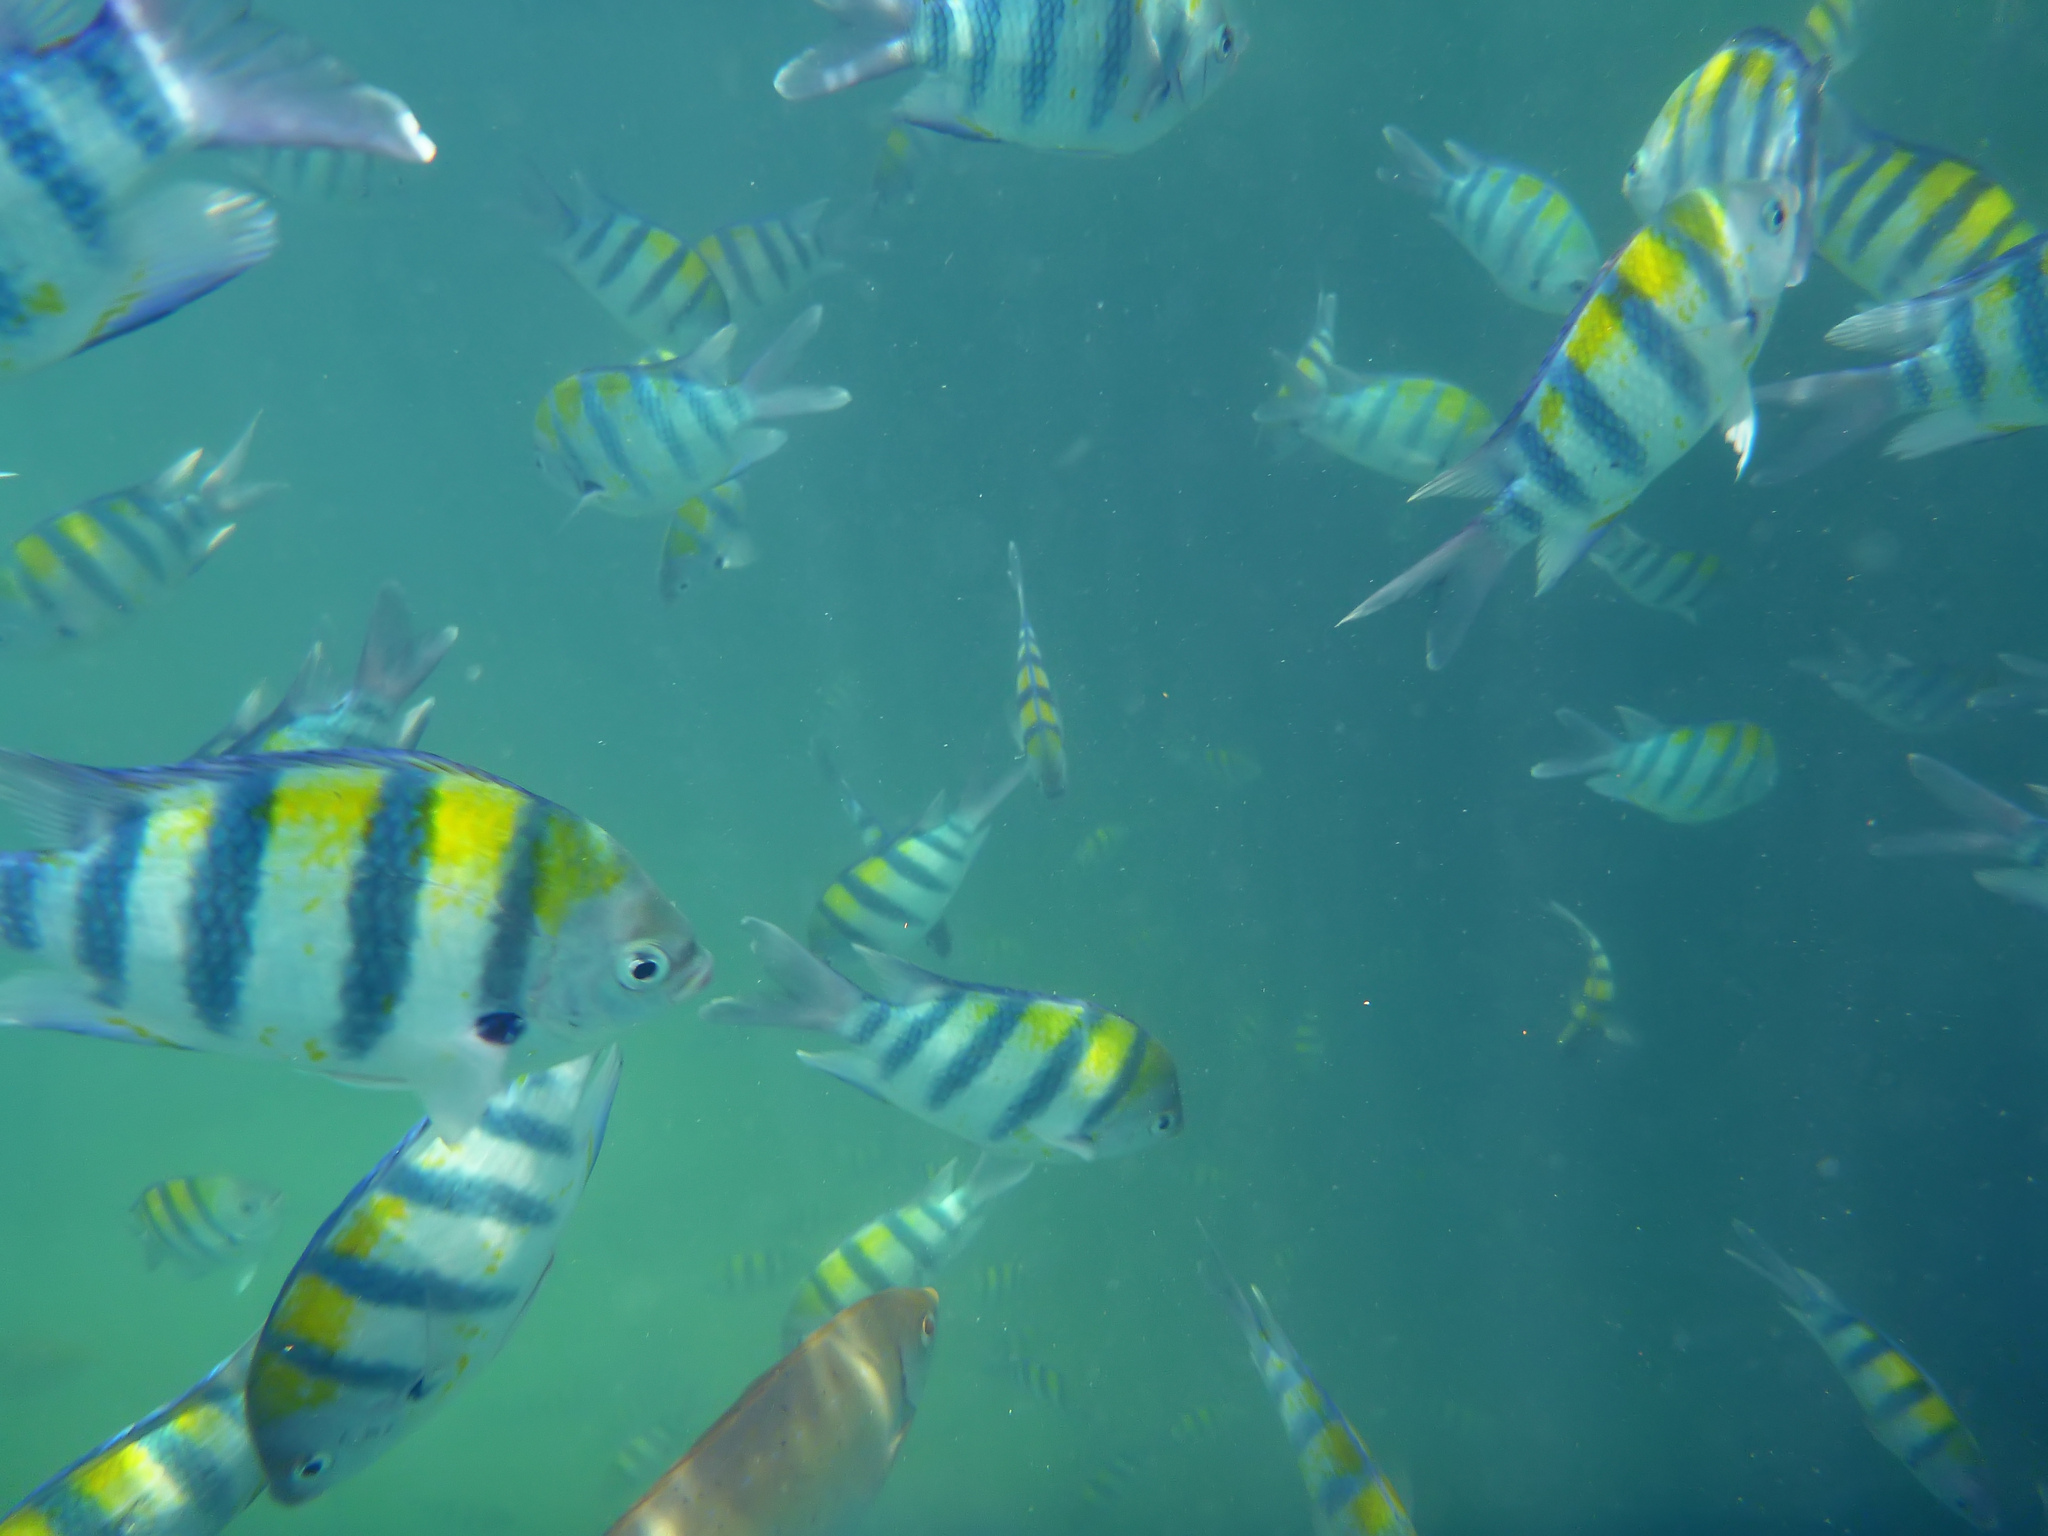 A school of sergeant major fish in Mombasa Marine reserve
Photo by: Marc
Link: https://flic.kr/p/dMW2Qw